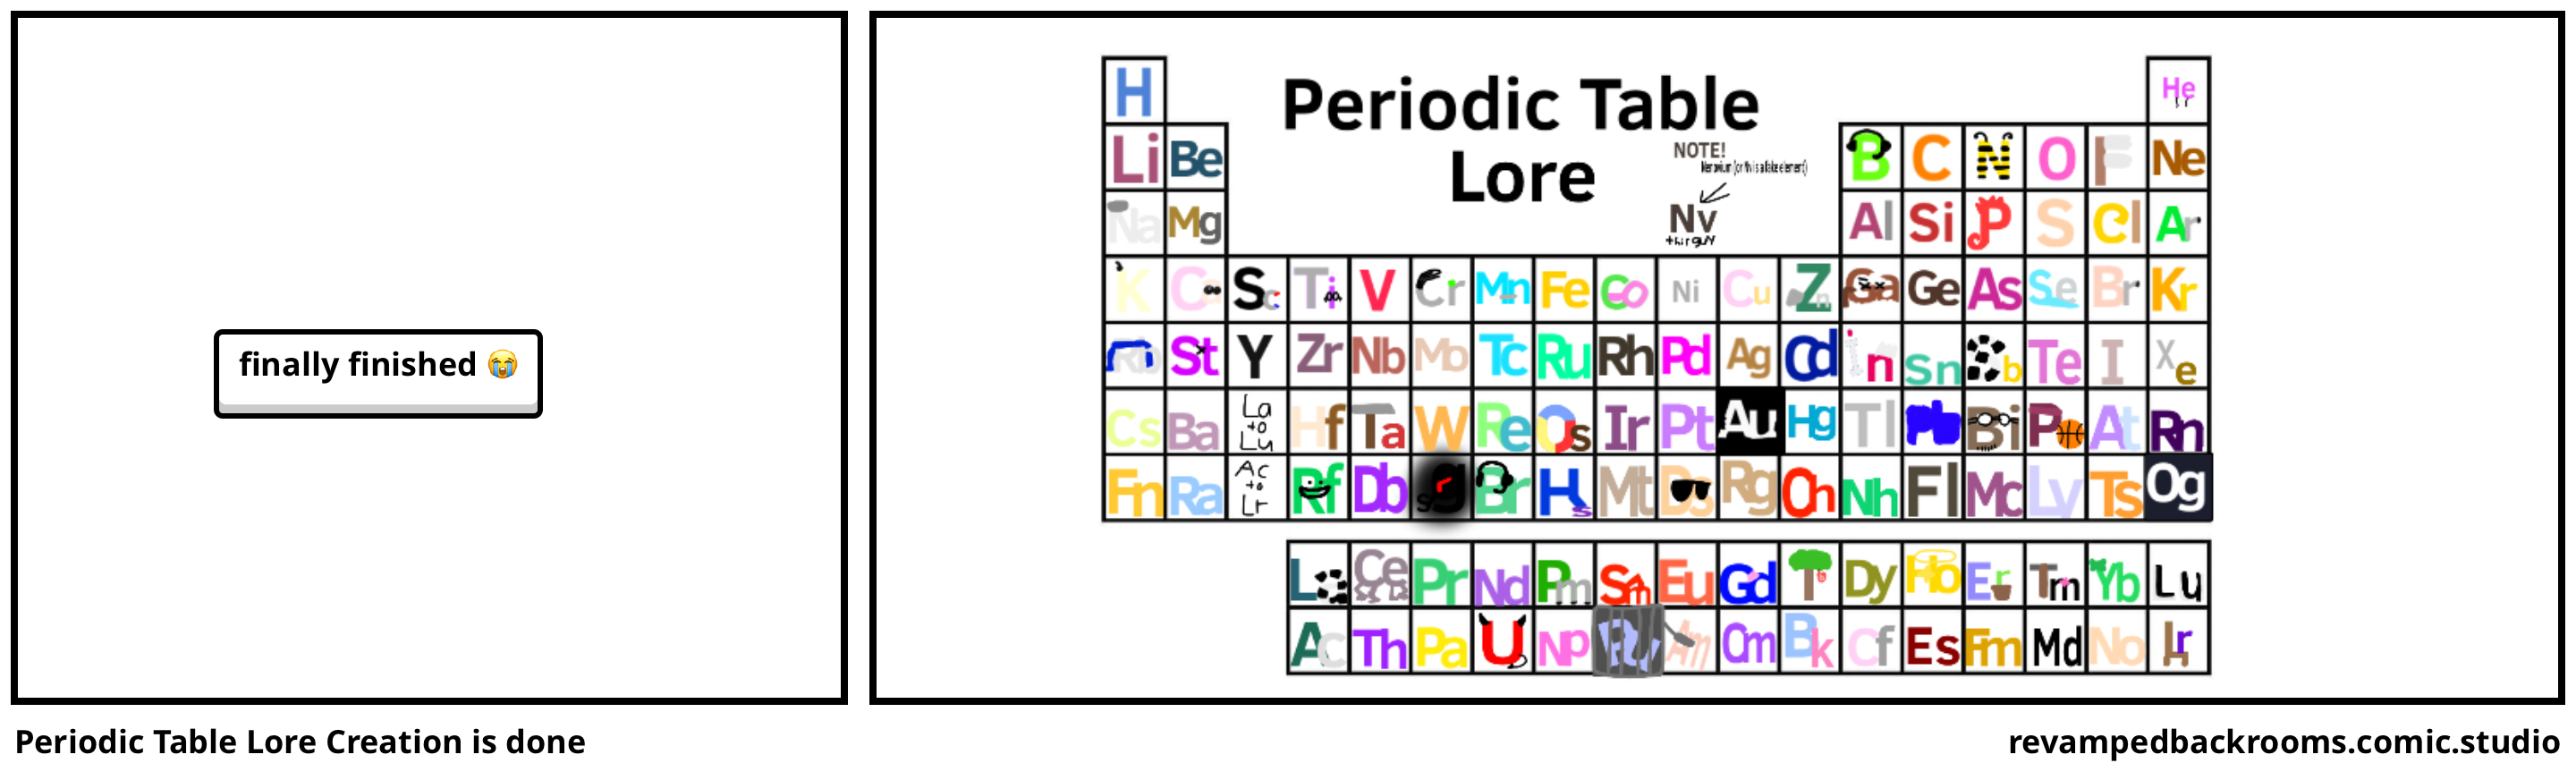 Periodic Table Lore Creation is done